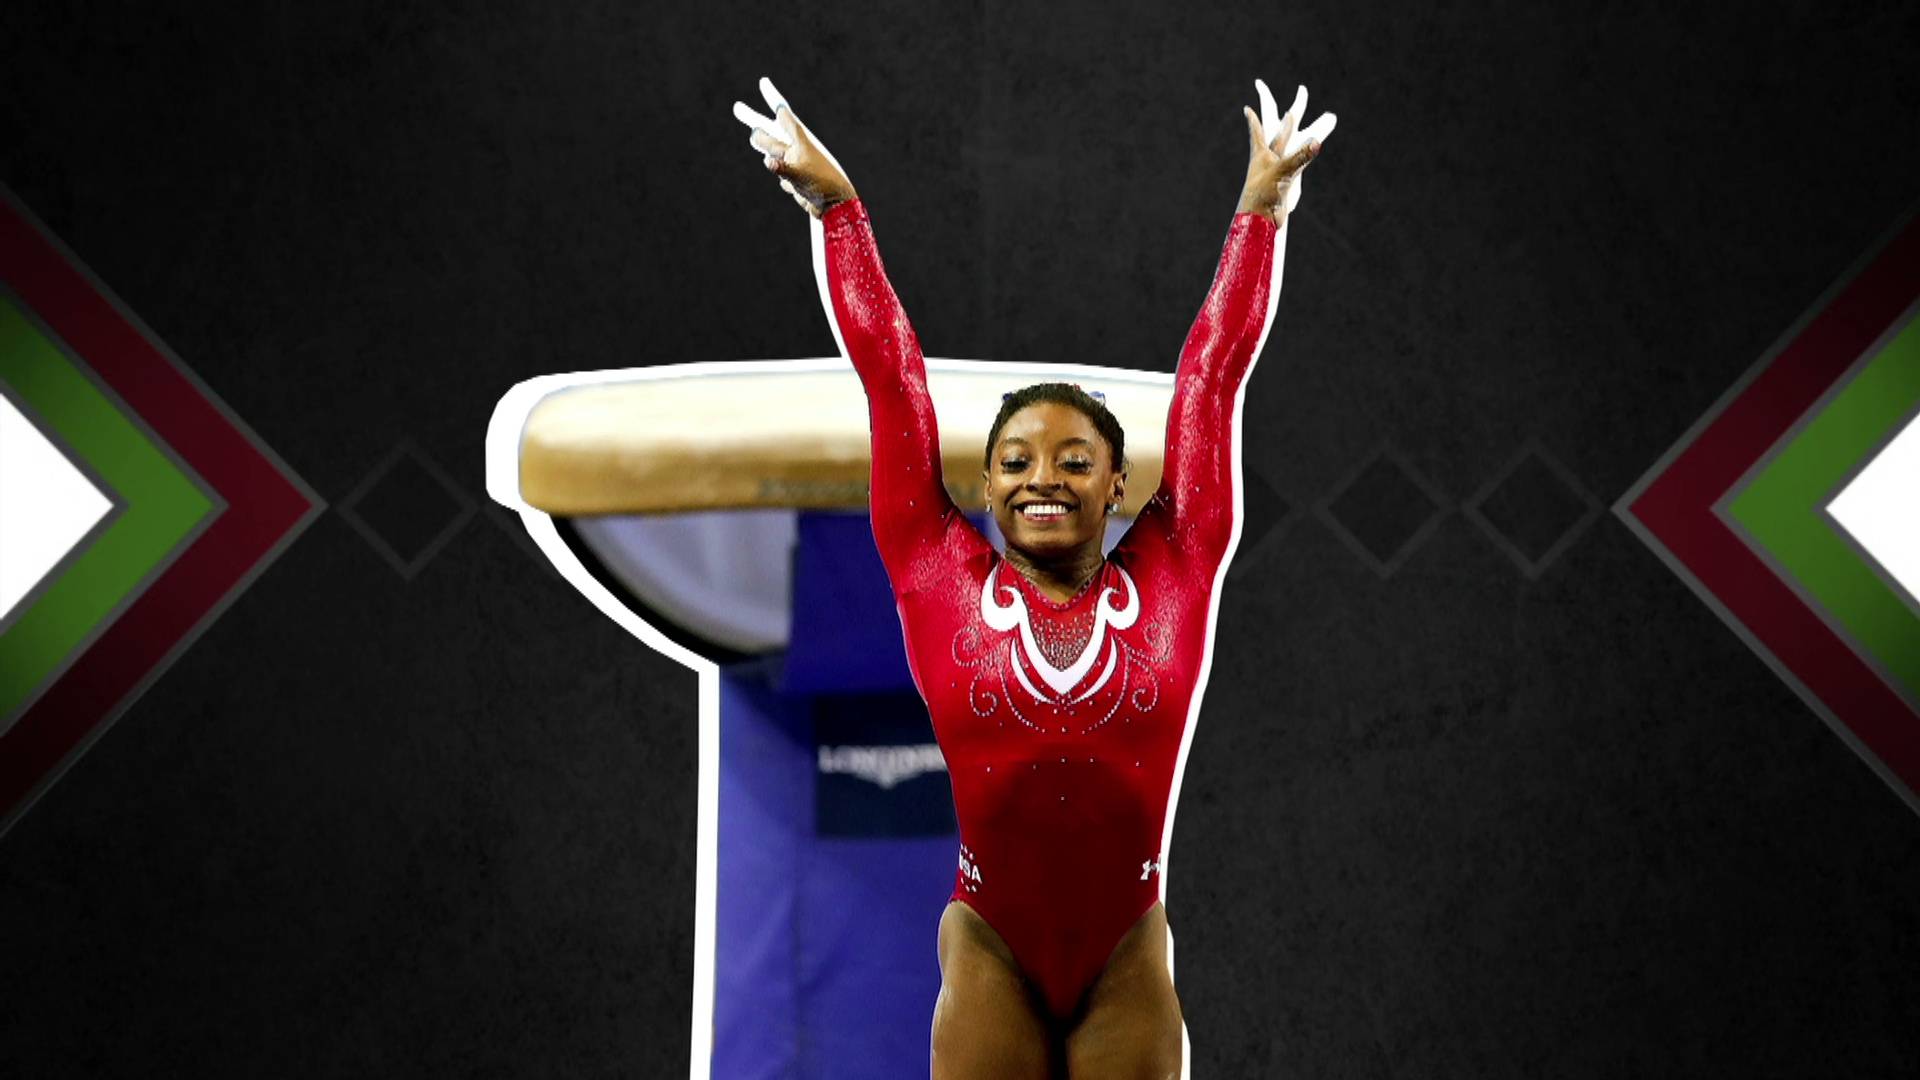 News, Simone Biles, Black History Month 2015, Sports, Changing the Game, BET, Exclusives, Gymnastics